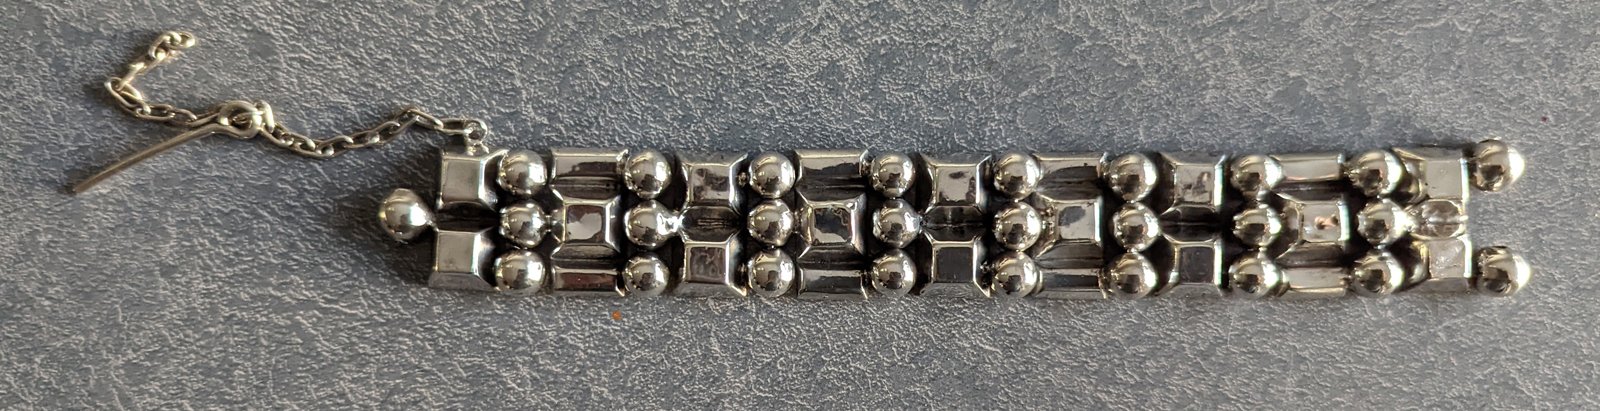 Past auction: Mexican silver jewelry, Margot de Taxco 20th century | July  26, 2010